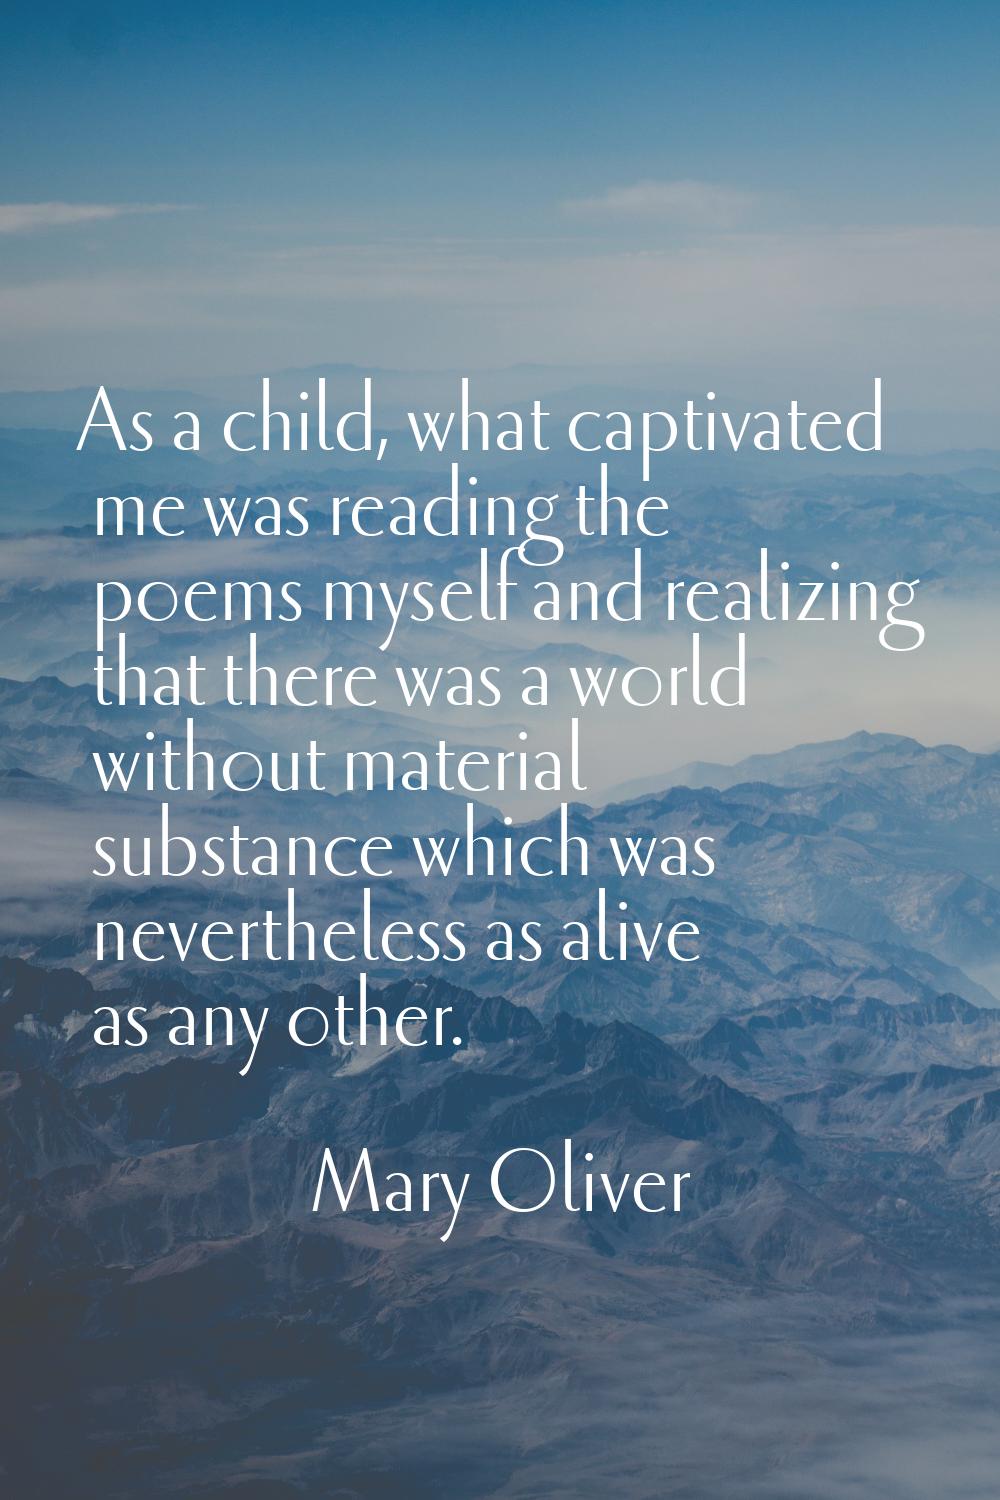 As a child, what captivated me was reading the poems myself and realizing that there was a world wi